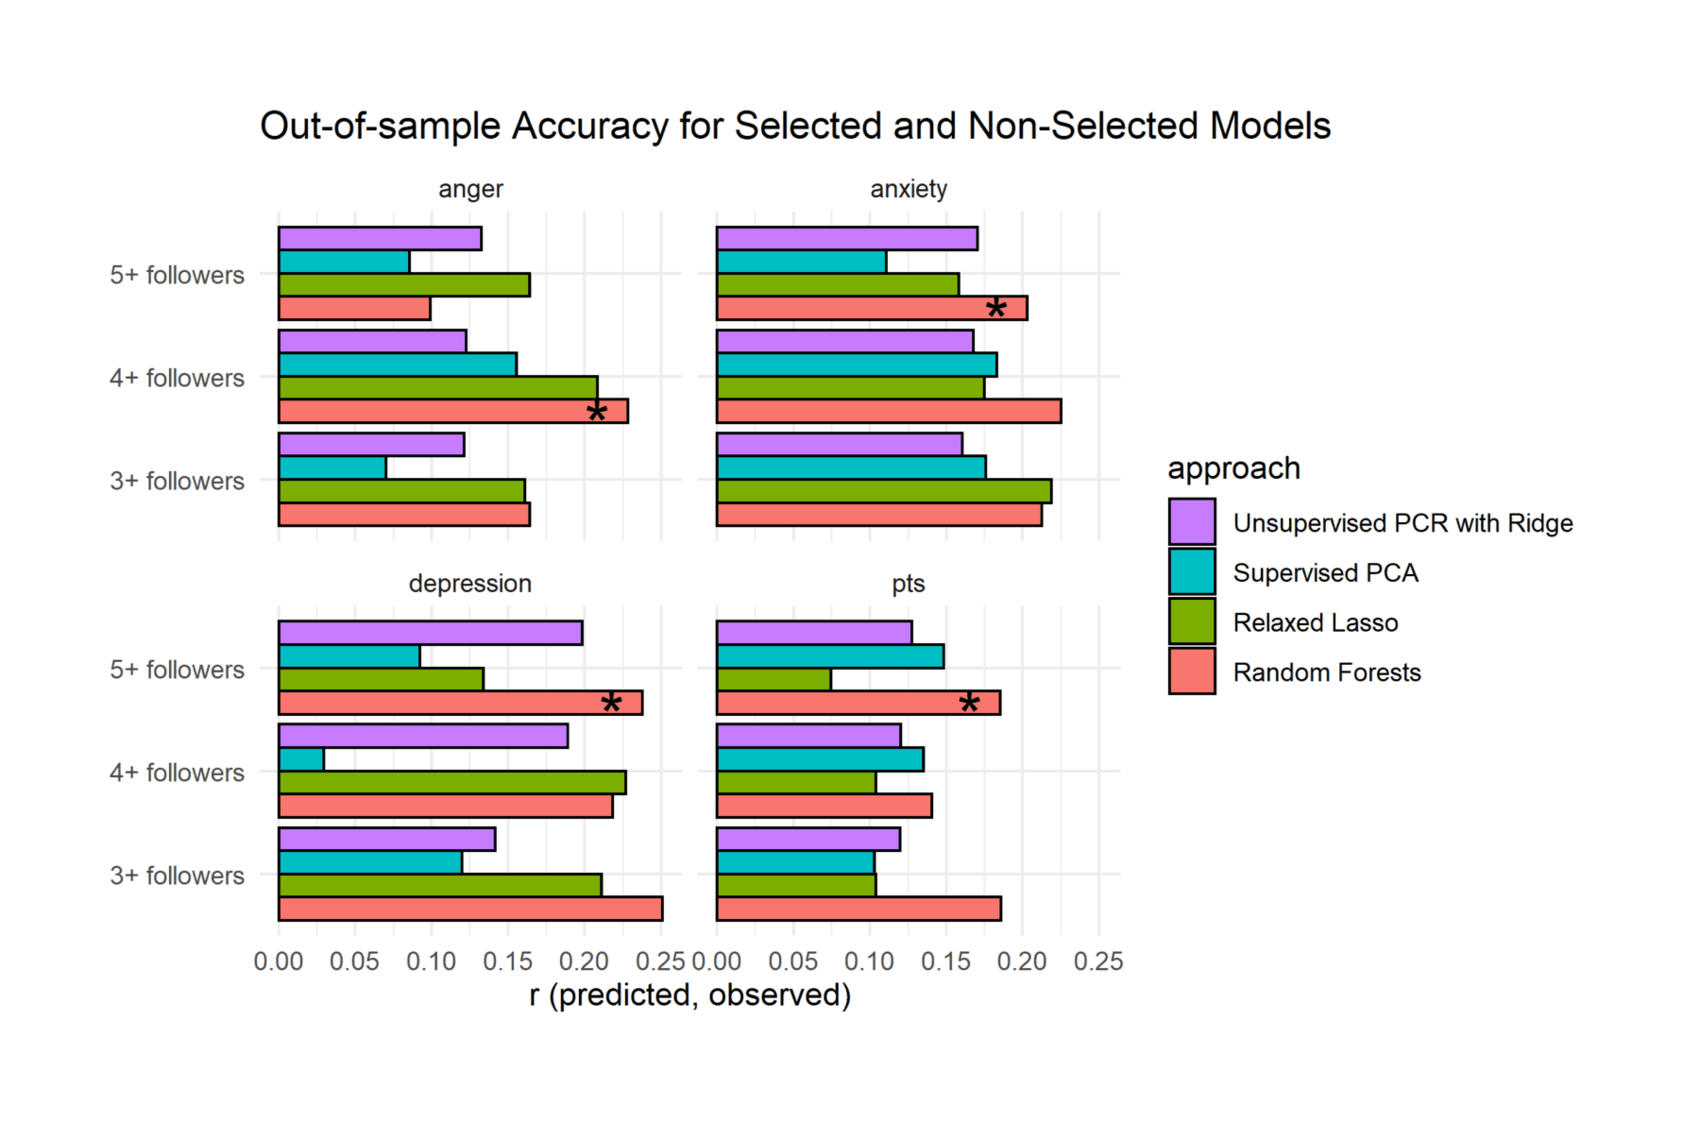 Figure 7: Out-of-sample Accuracy for Selected and Non-Selected Models